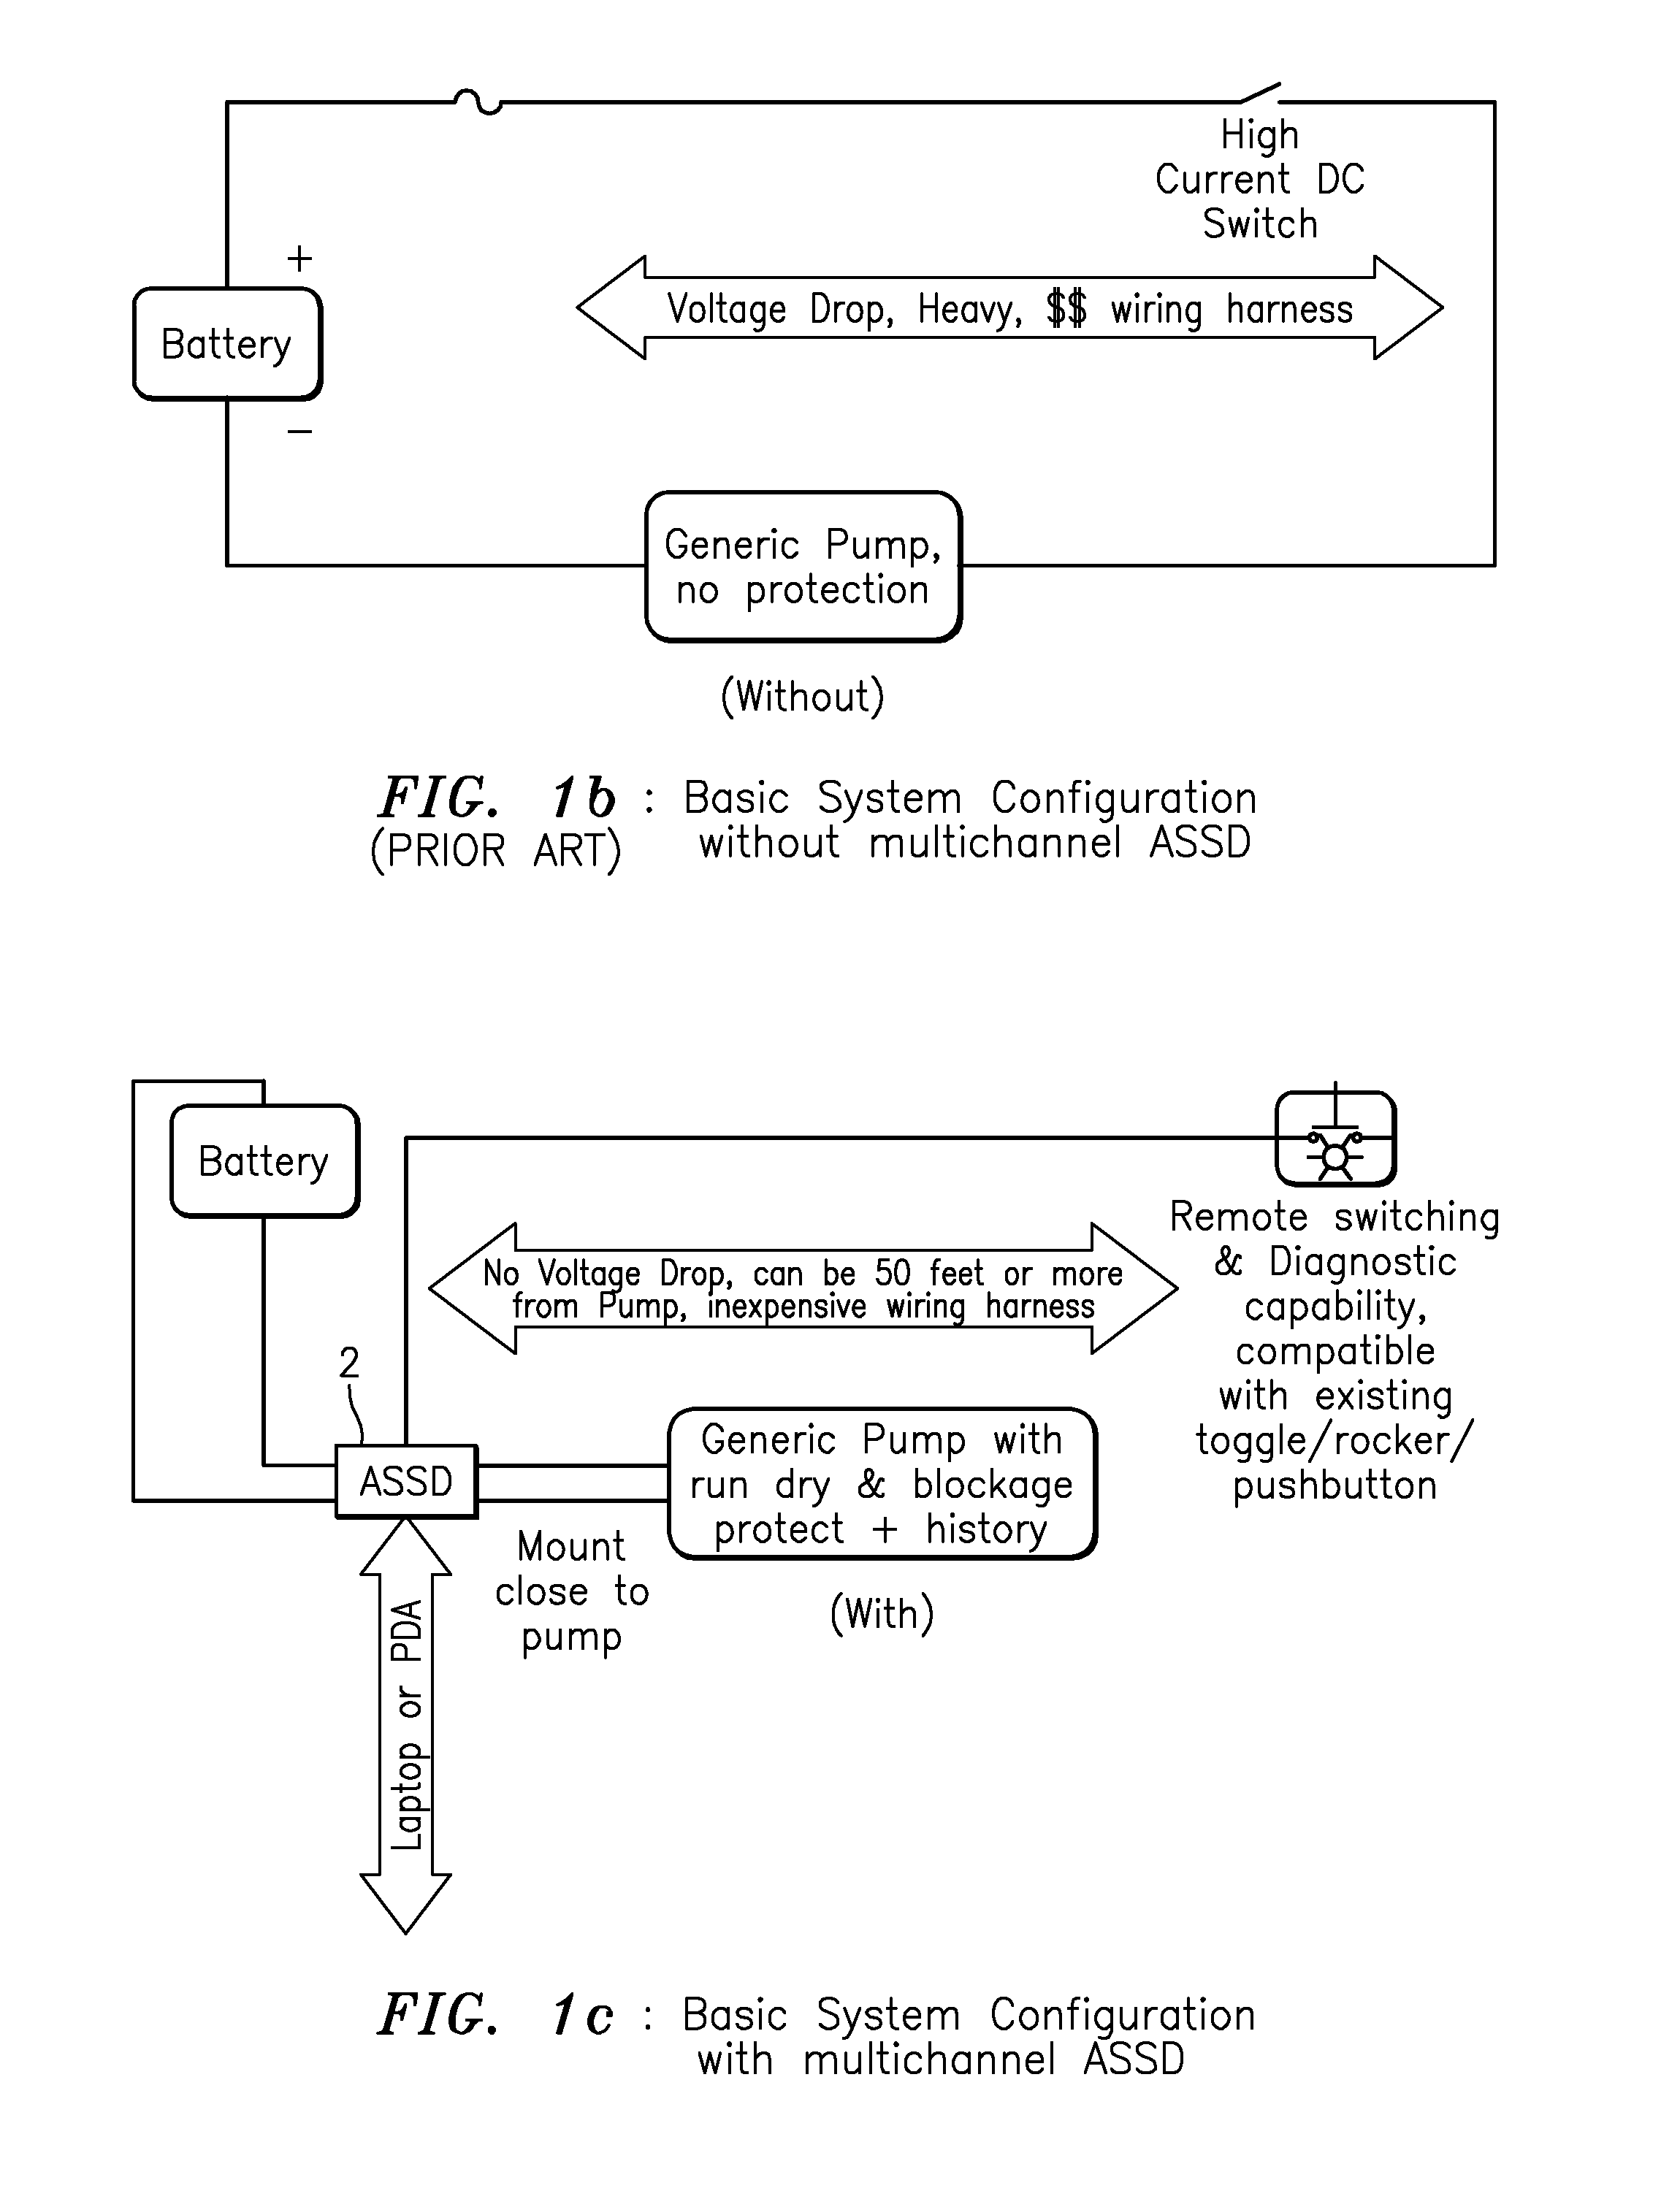 Multiple-channel active sensing and switching device